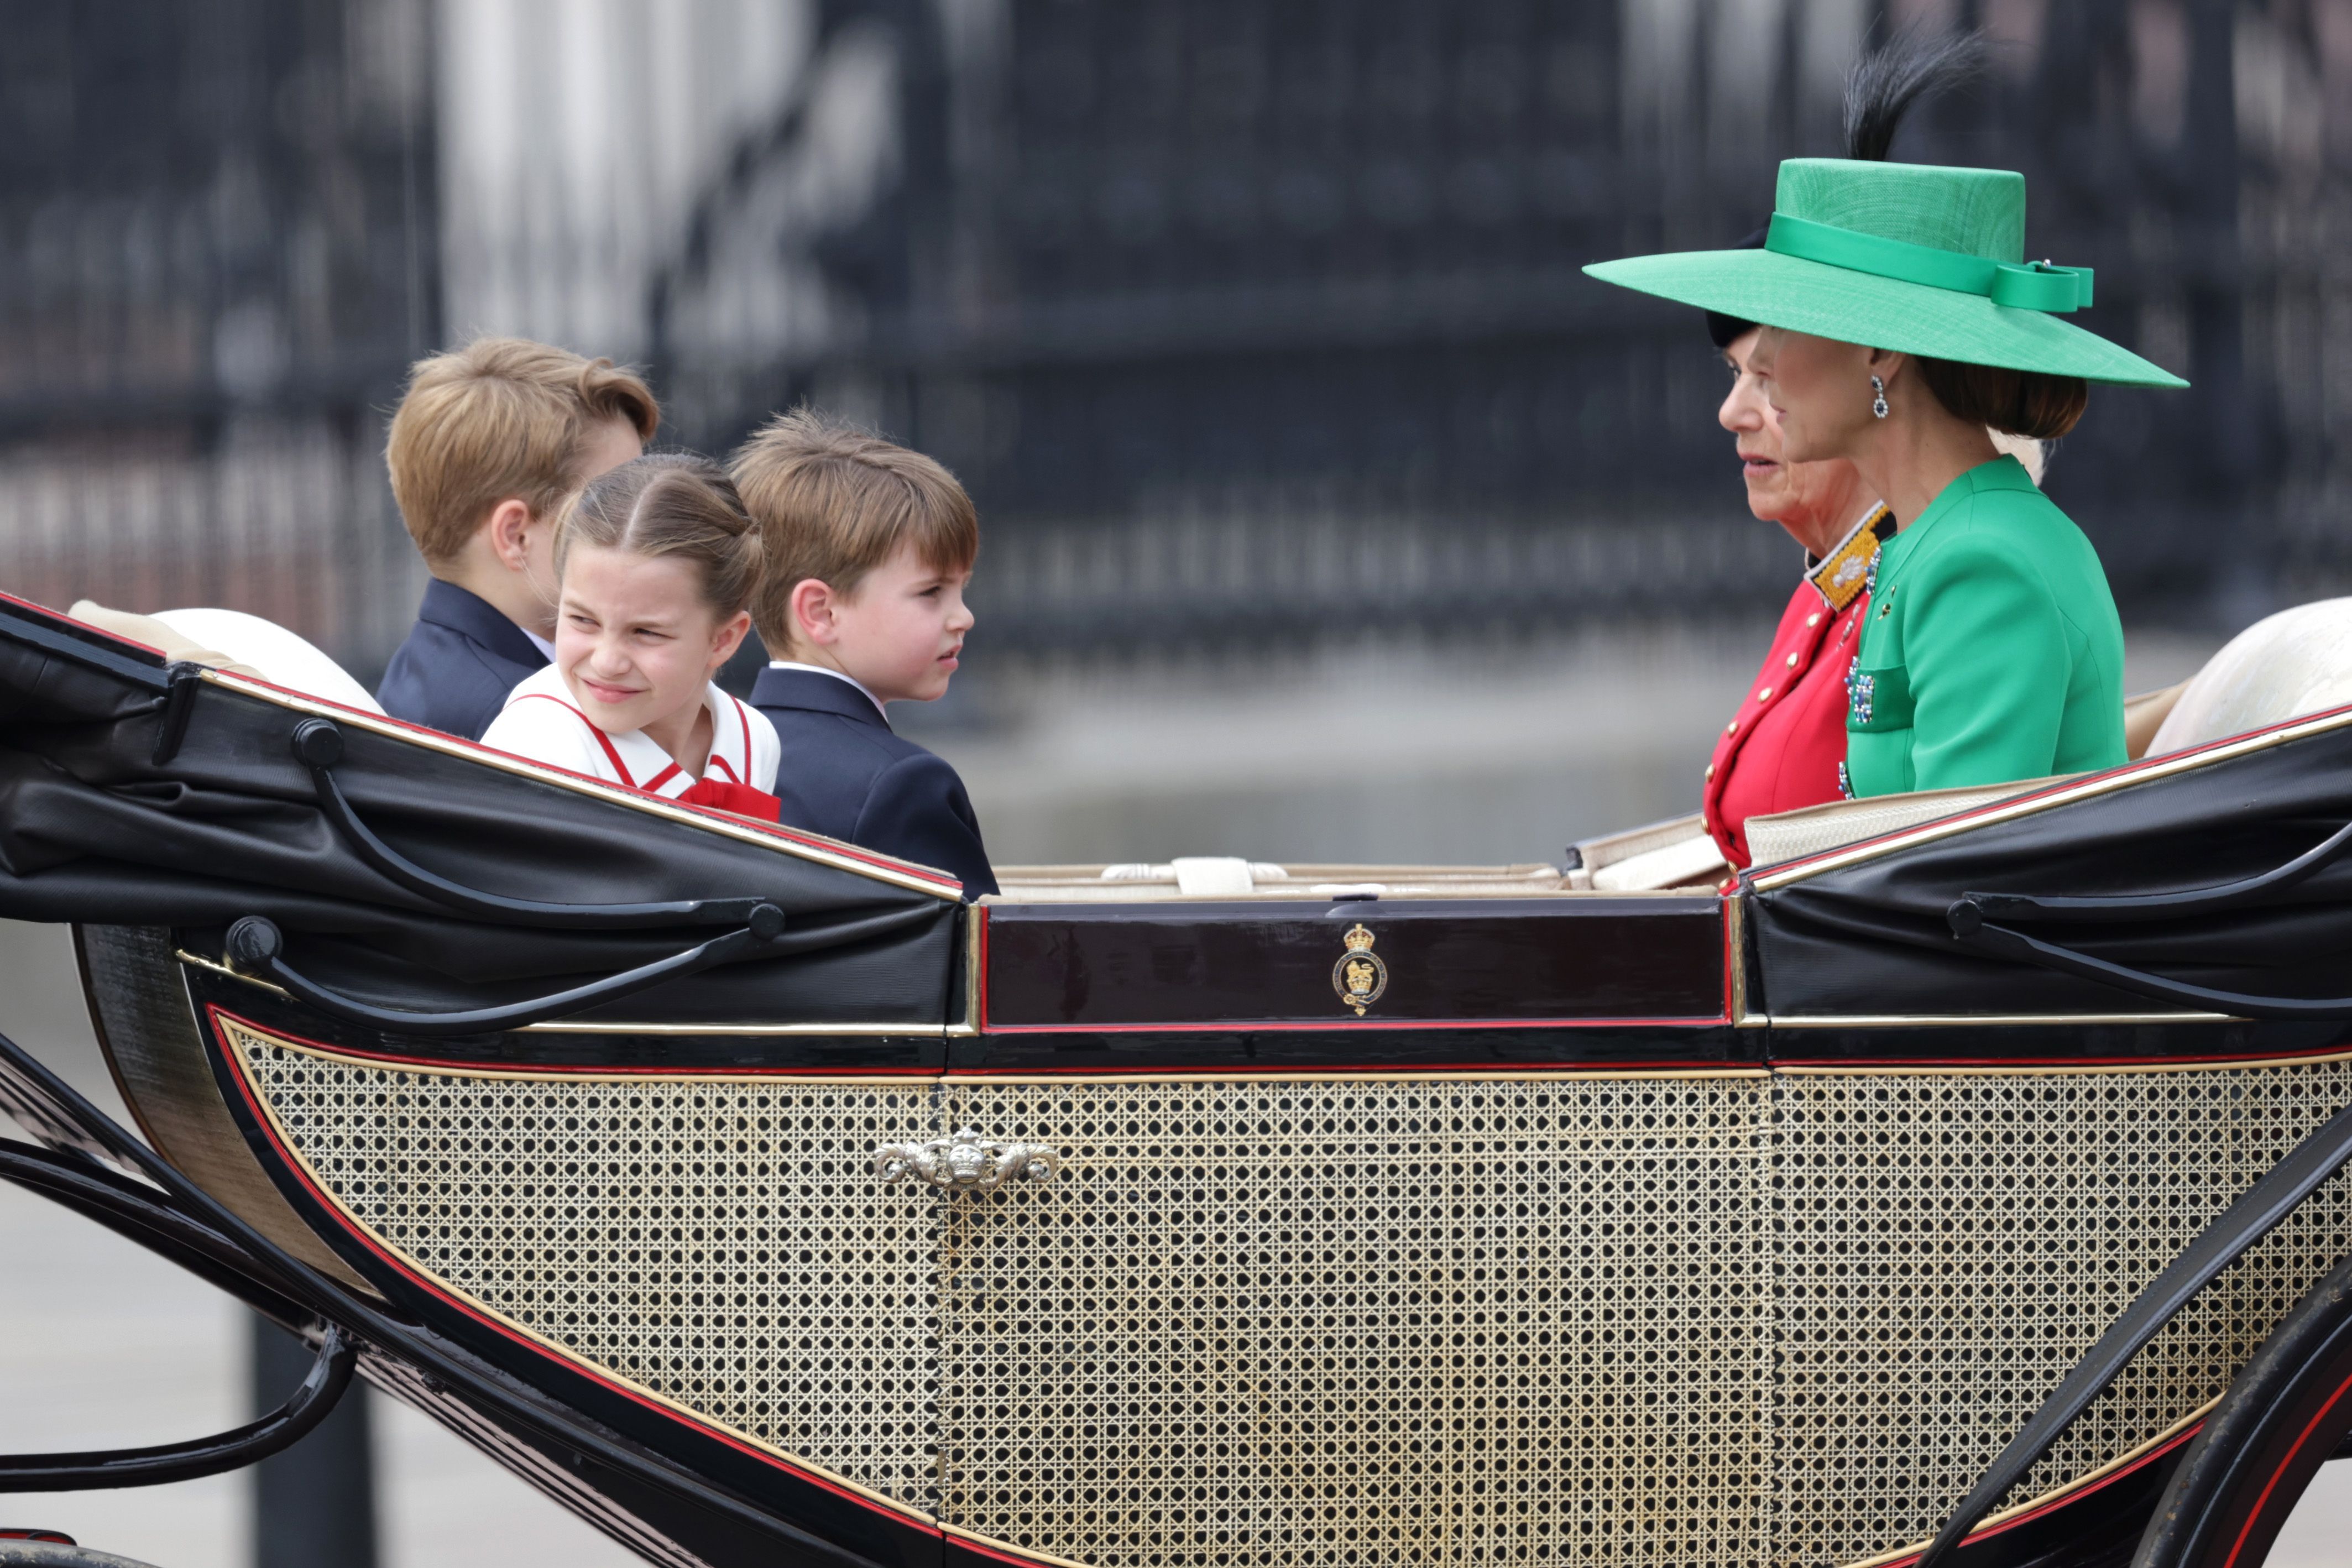 Princess Charlotte looking back while riding a carriage with her brothers, her mom (Kate Middleton) and her step grandmother (Camilla Parker Bowles)